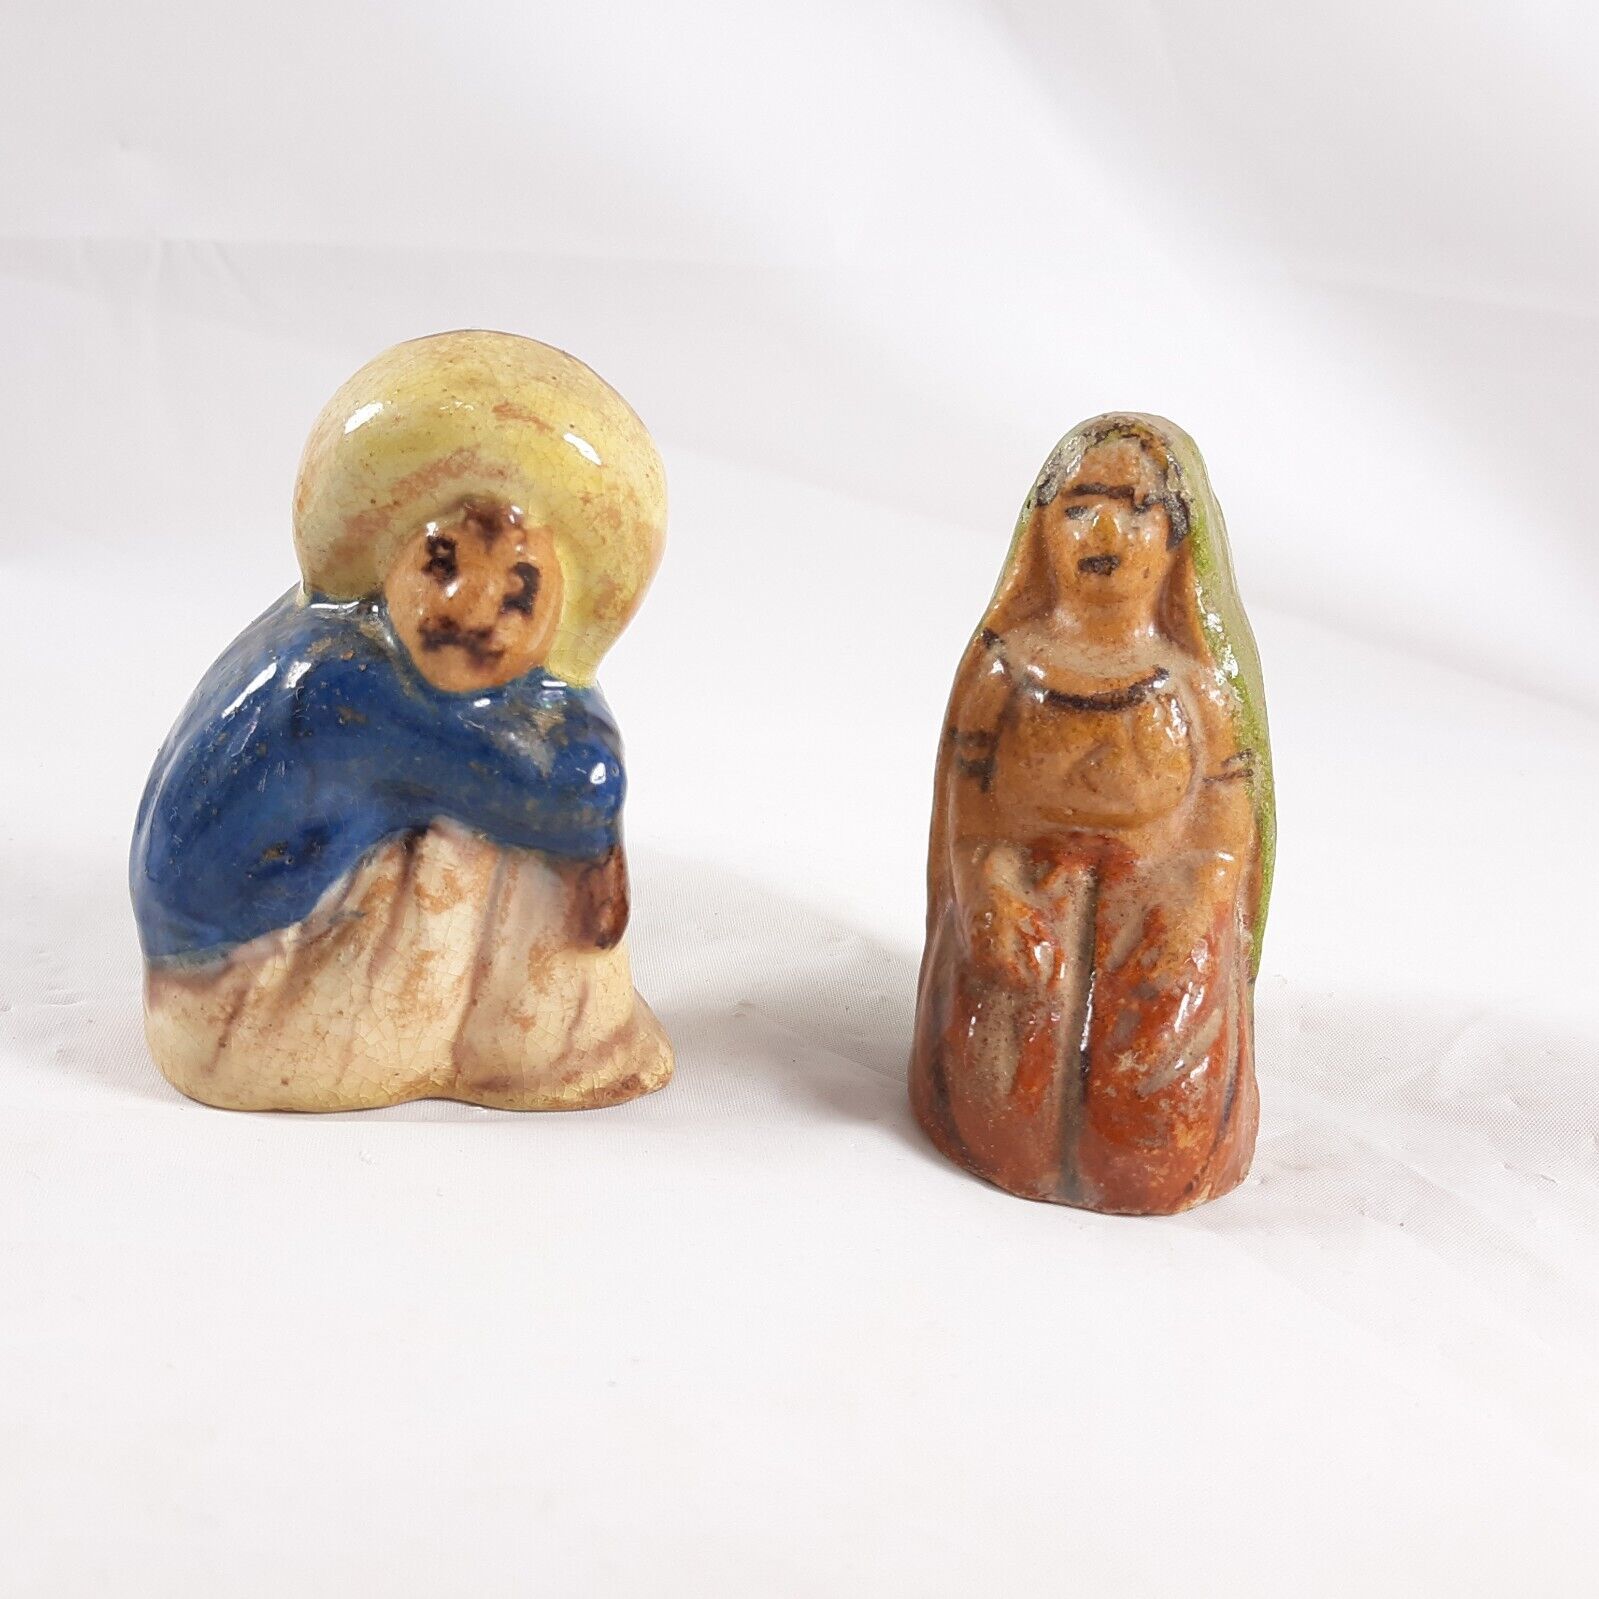 Primary image for Vintage Mexico Terra Cotta Salt and Pepper Shakers Handmade